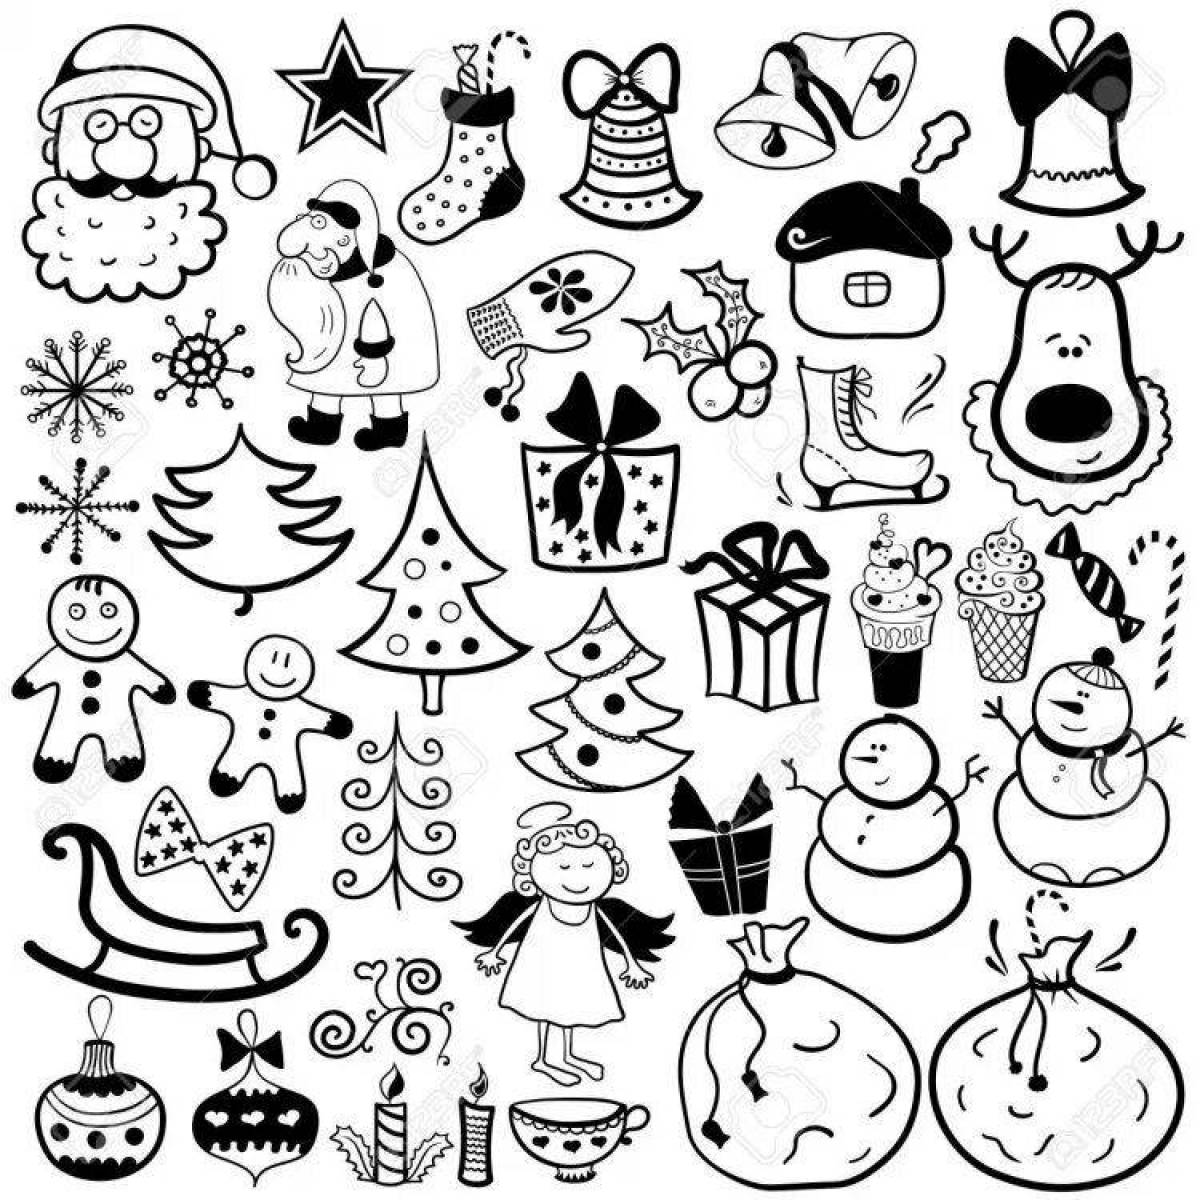 Fancy Christmas stickers